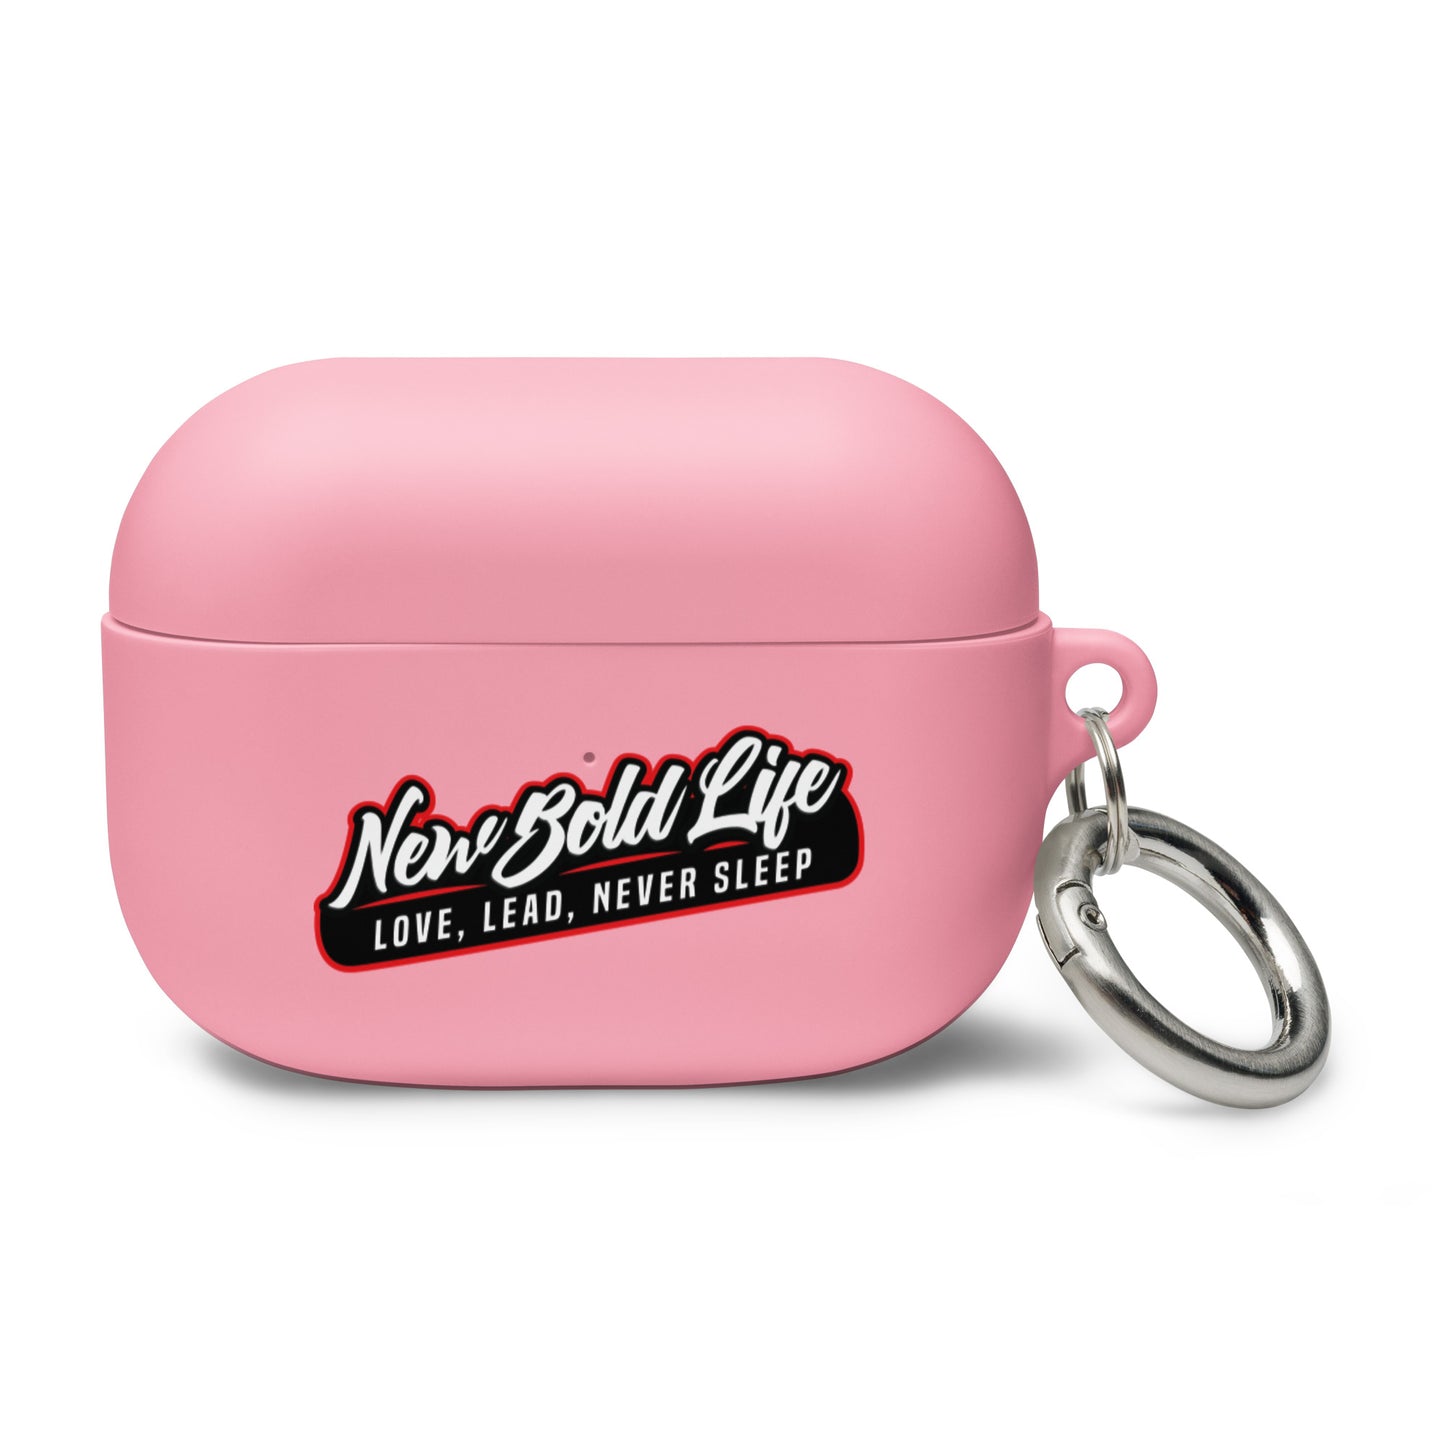 New Bold Life AirPods case - Accessories